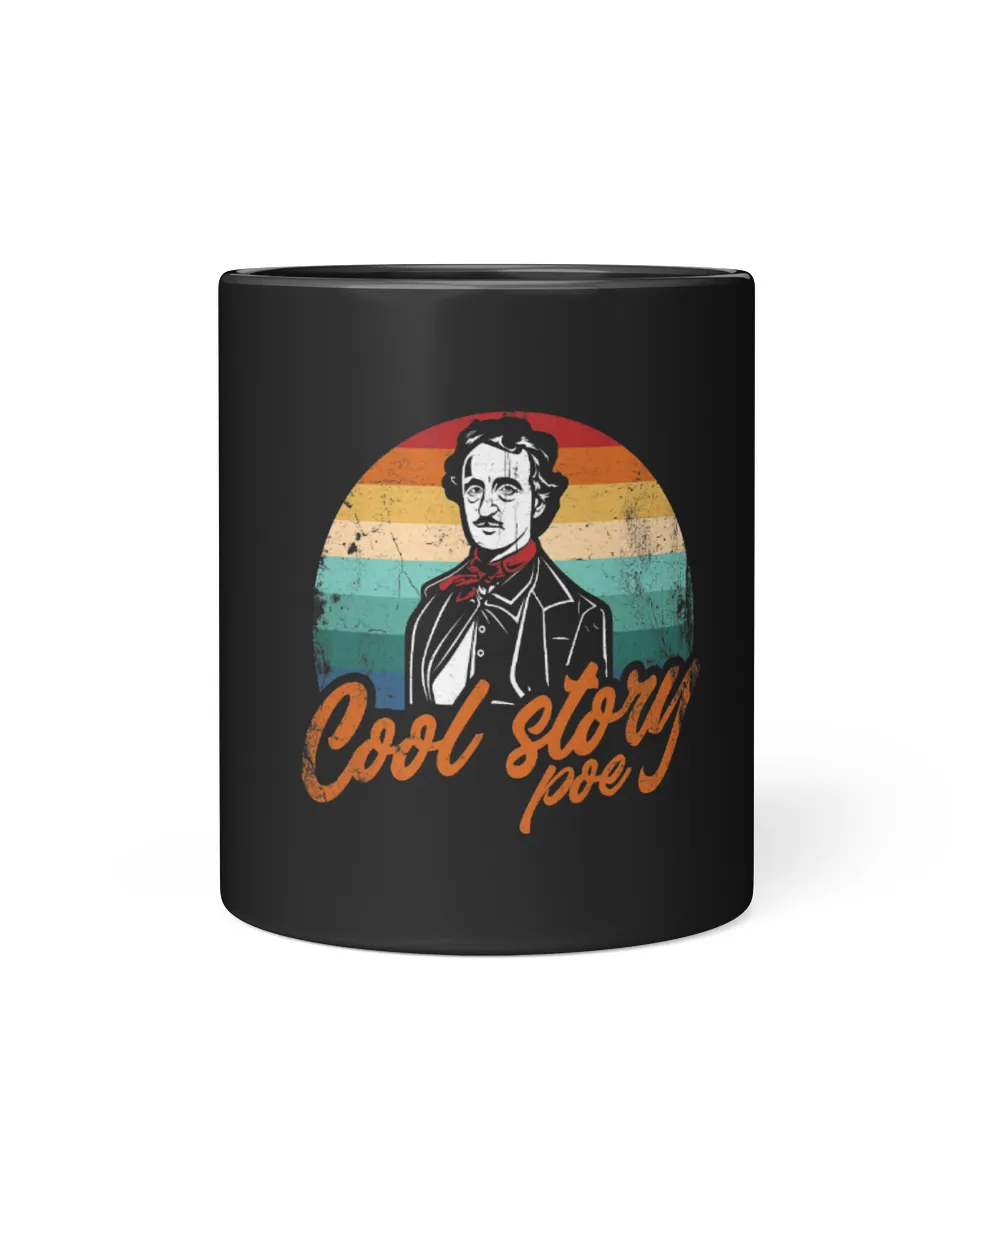 Cool Story Poe Design For Literary Reader And Writers